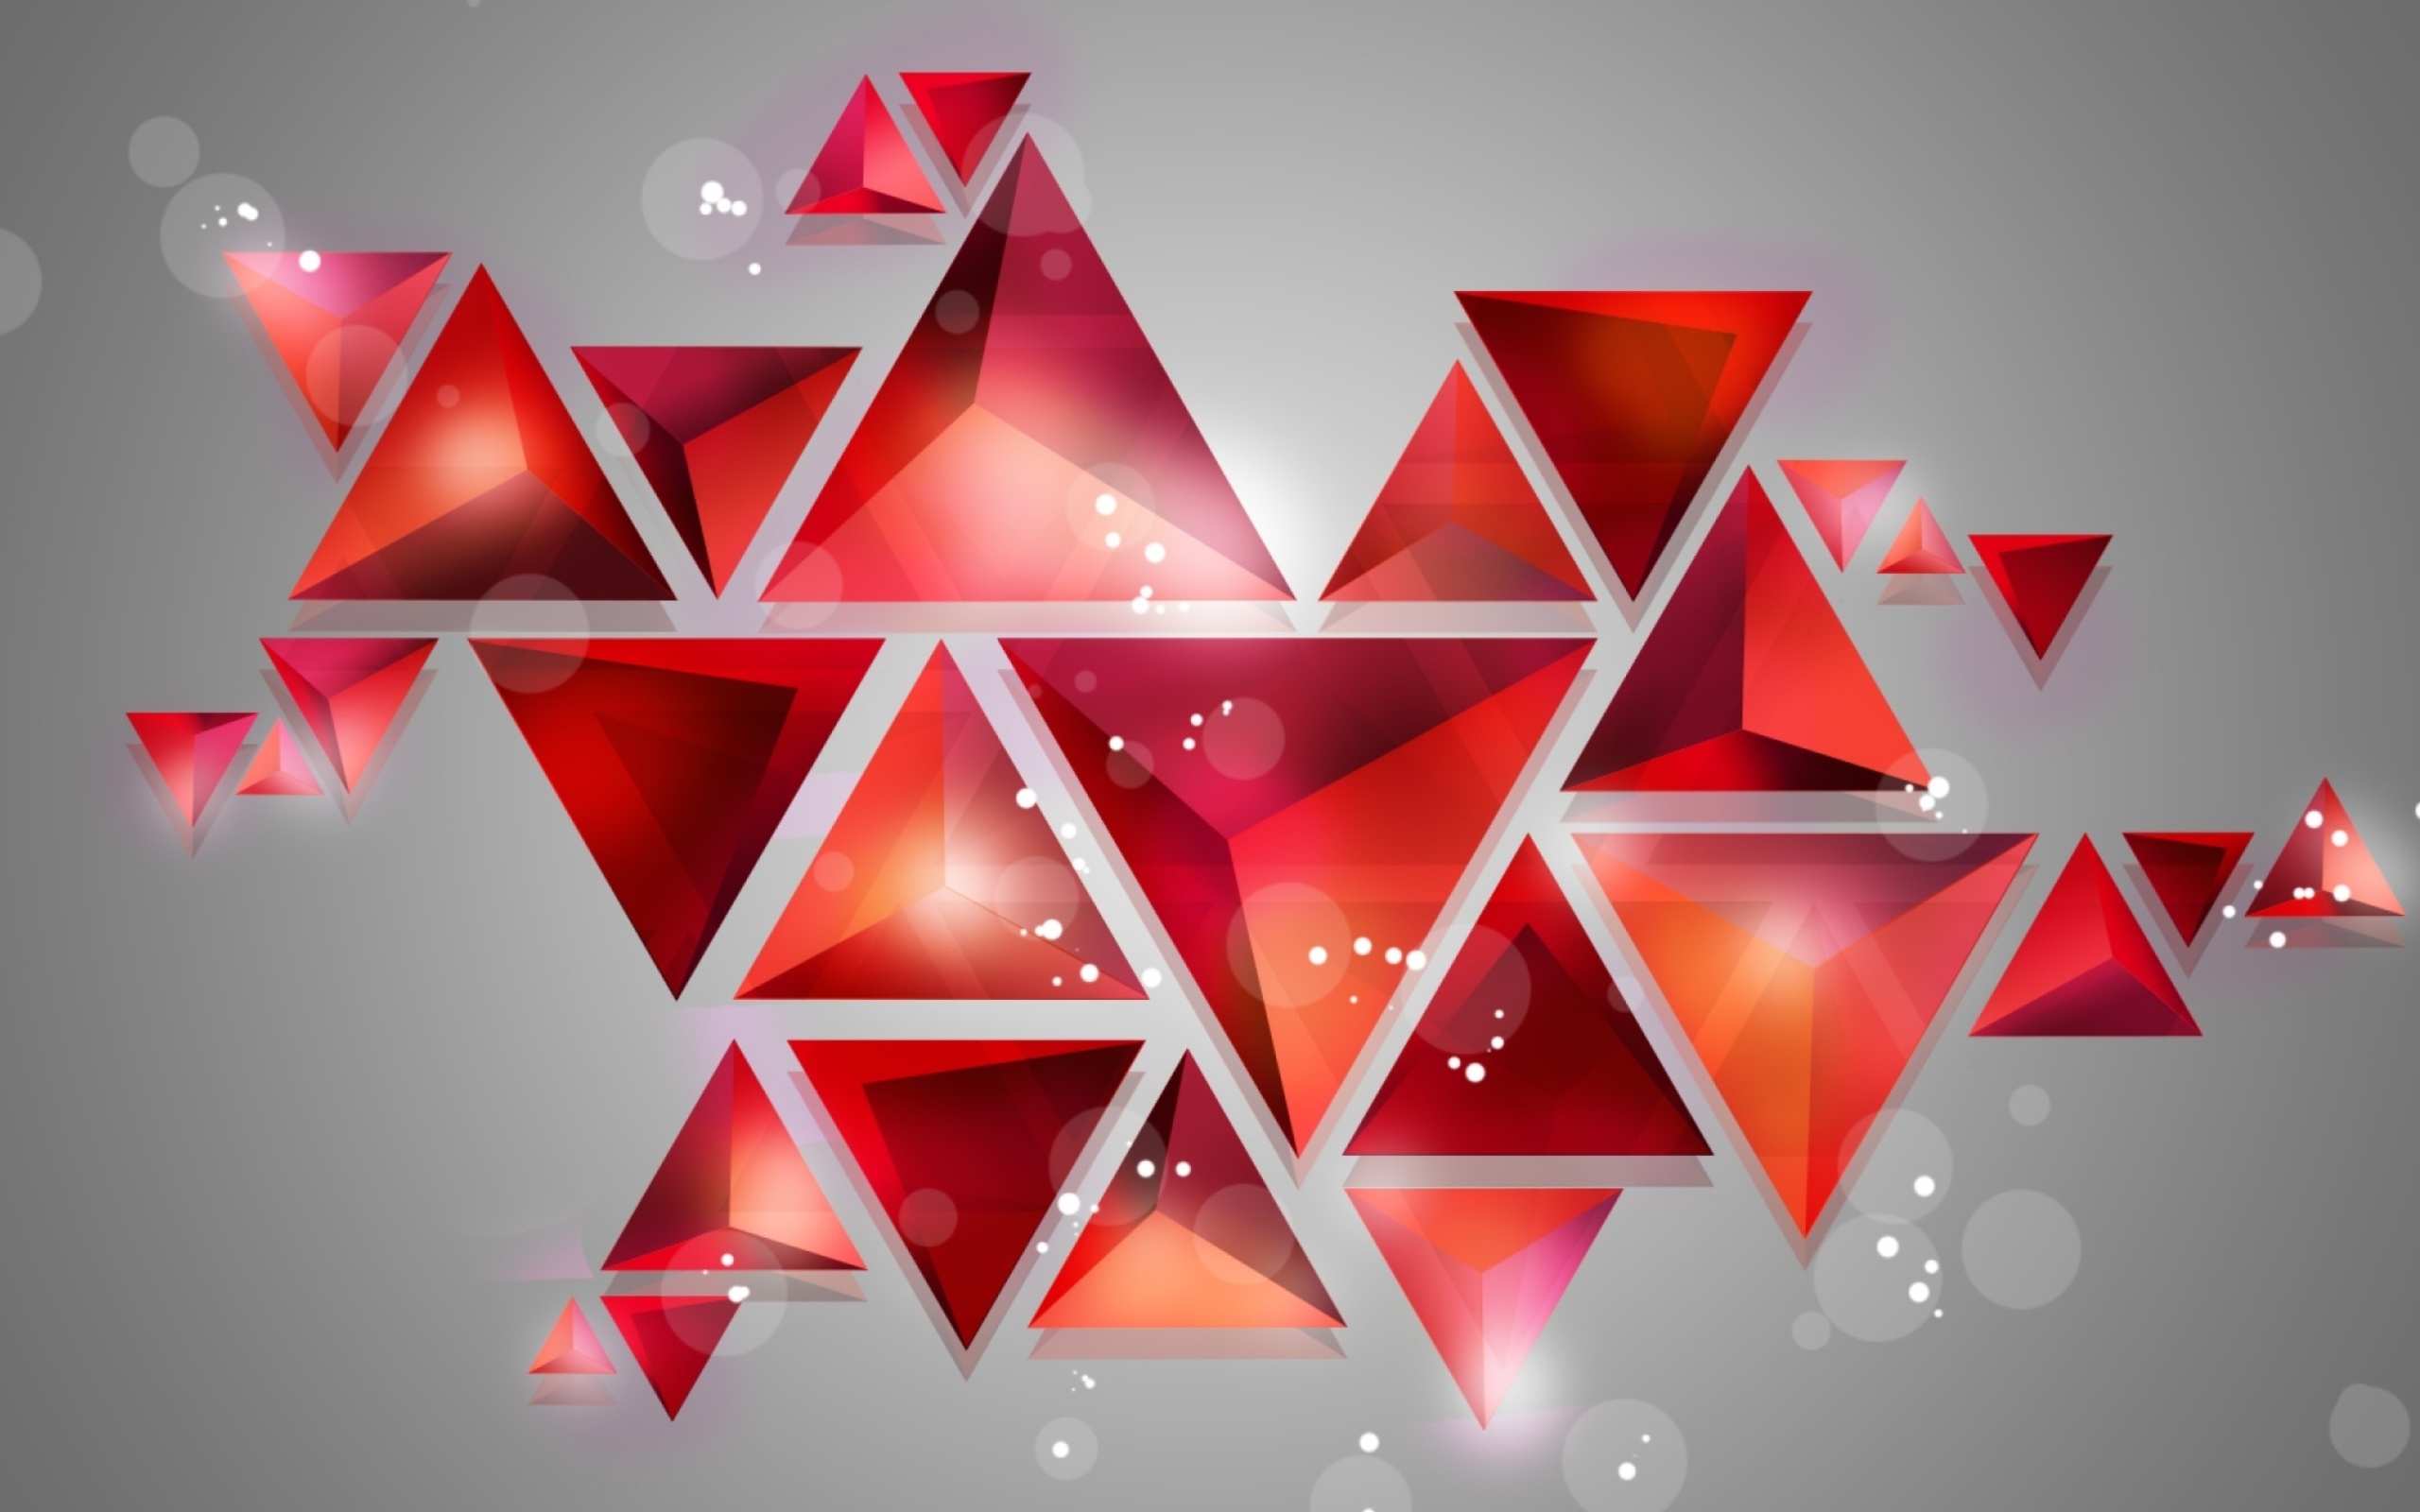 Das Geometry of red shades Wallpaper 2560x1600